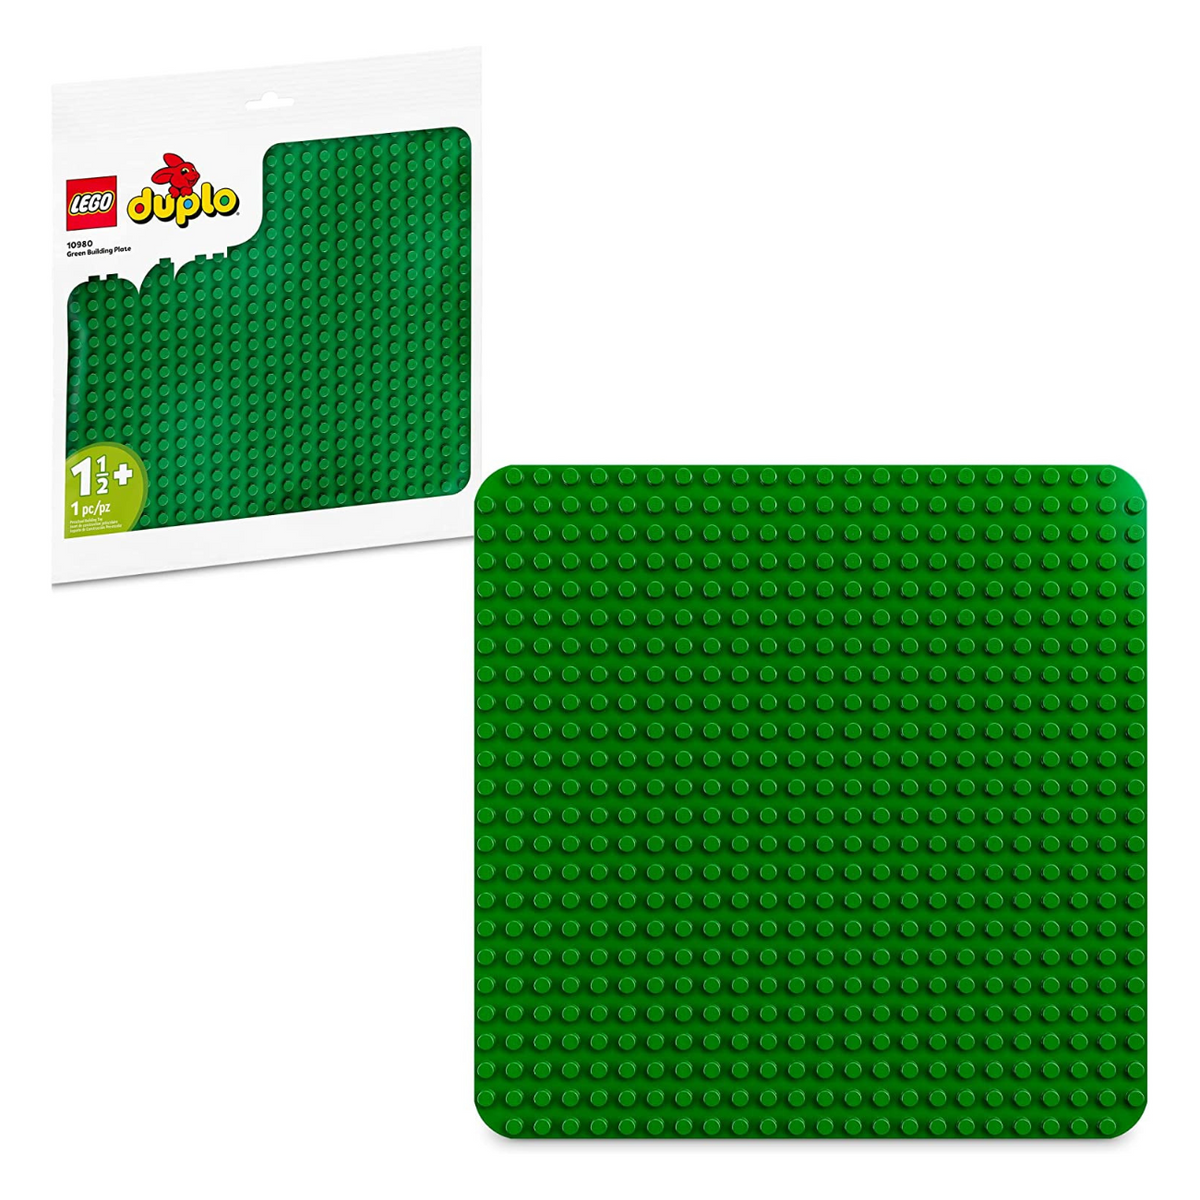 DUPLO Green Building Plate – Child's Play